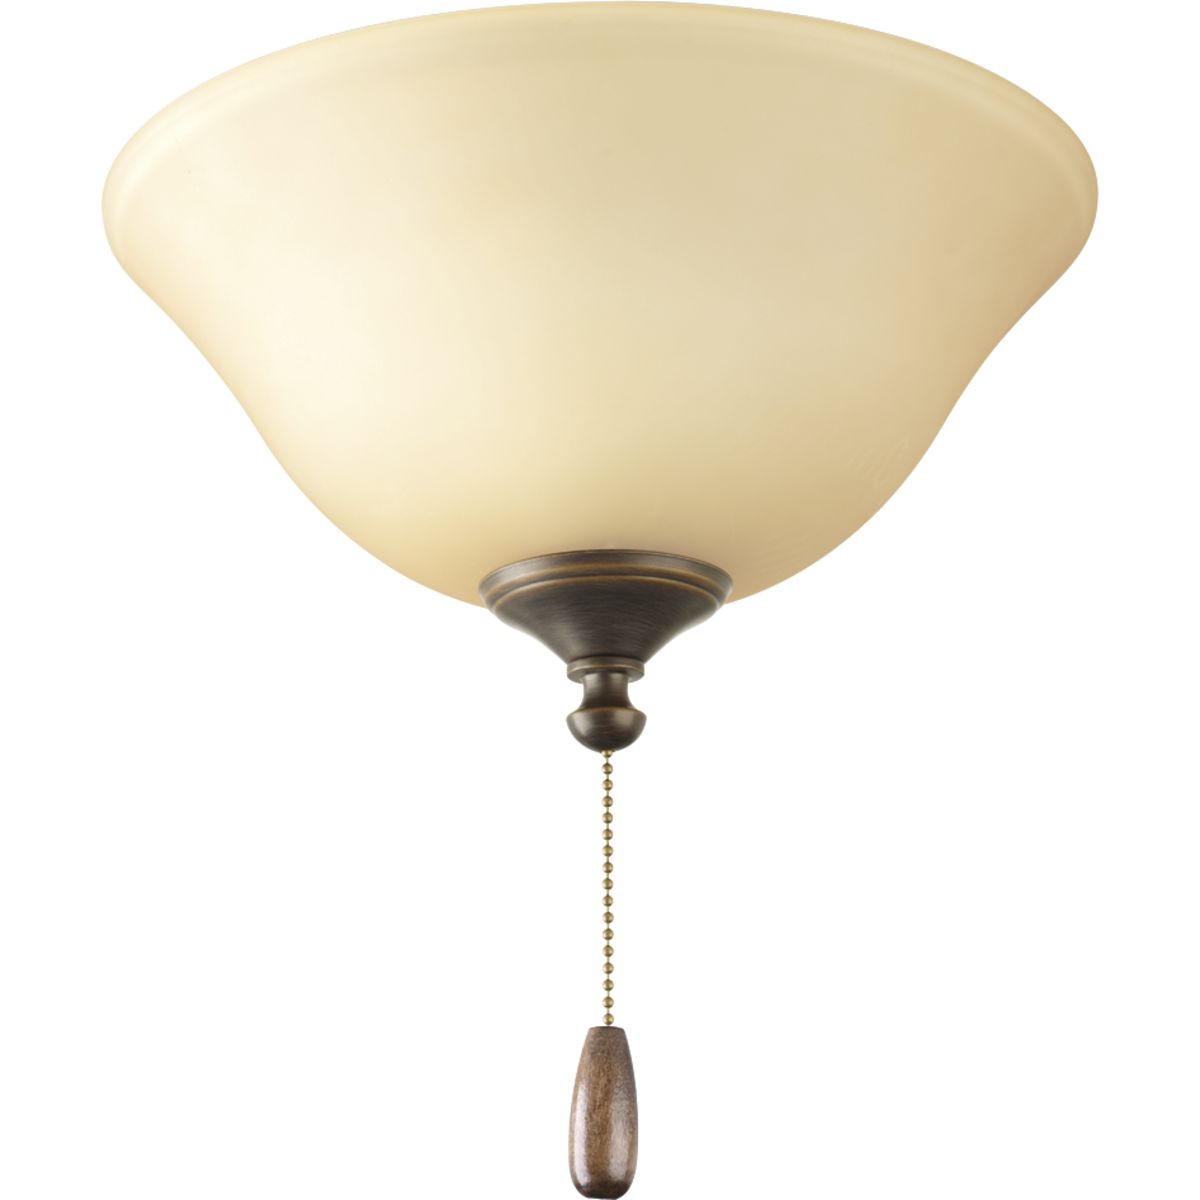 Antique Bronze two-light fan kit with etched Light Umber glass bowl. Elegant light umber glass conceals light bulbs and casts an inviting illumination in any size room. Universal style lets you use with any indoor fan that accept an accessory light. Quick-connect wiring makes the installation process quick and easy.